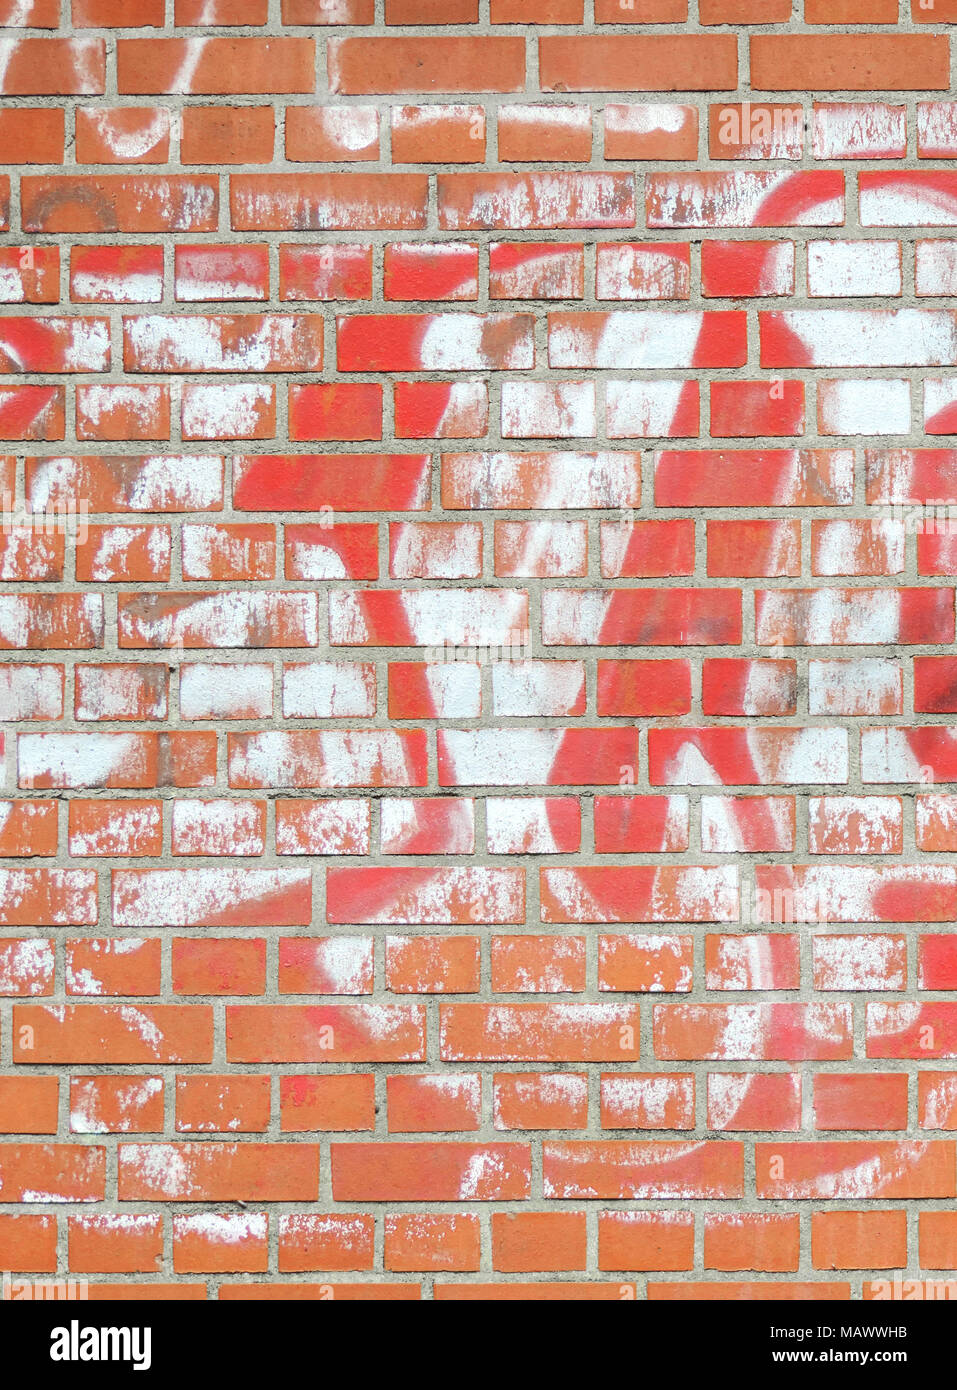 Brick stone wall background, textured stone background. Full frame shot of a red brick wall, backdrop. Stock Photo